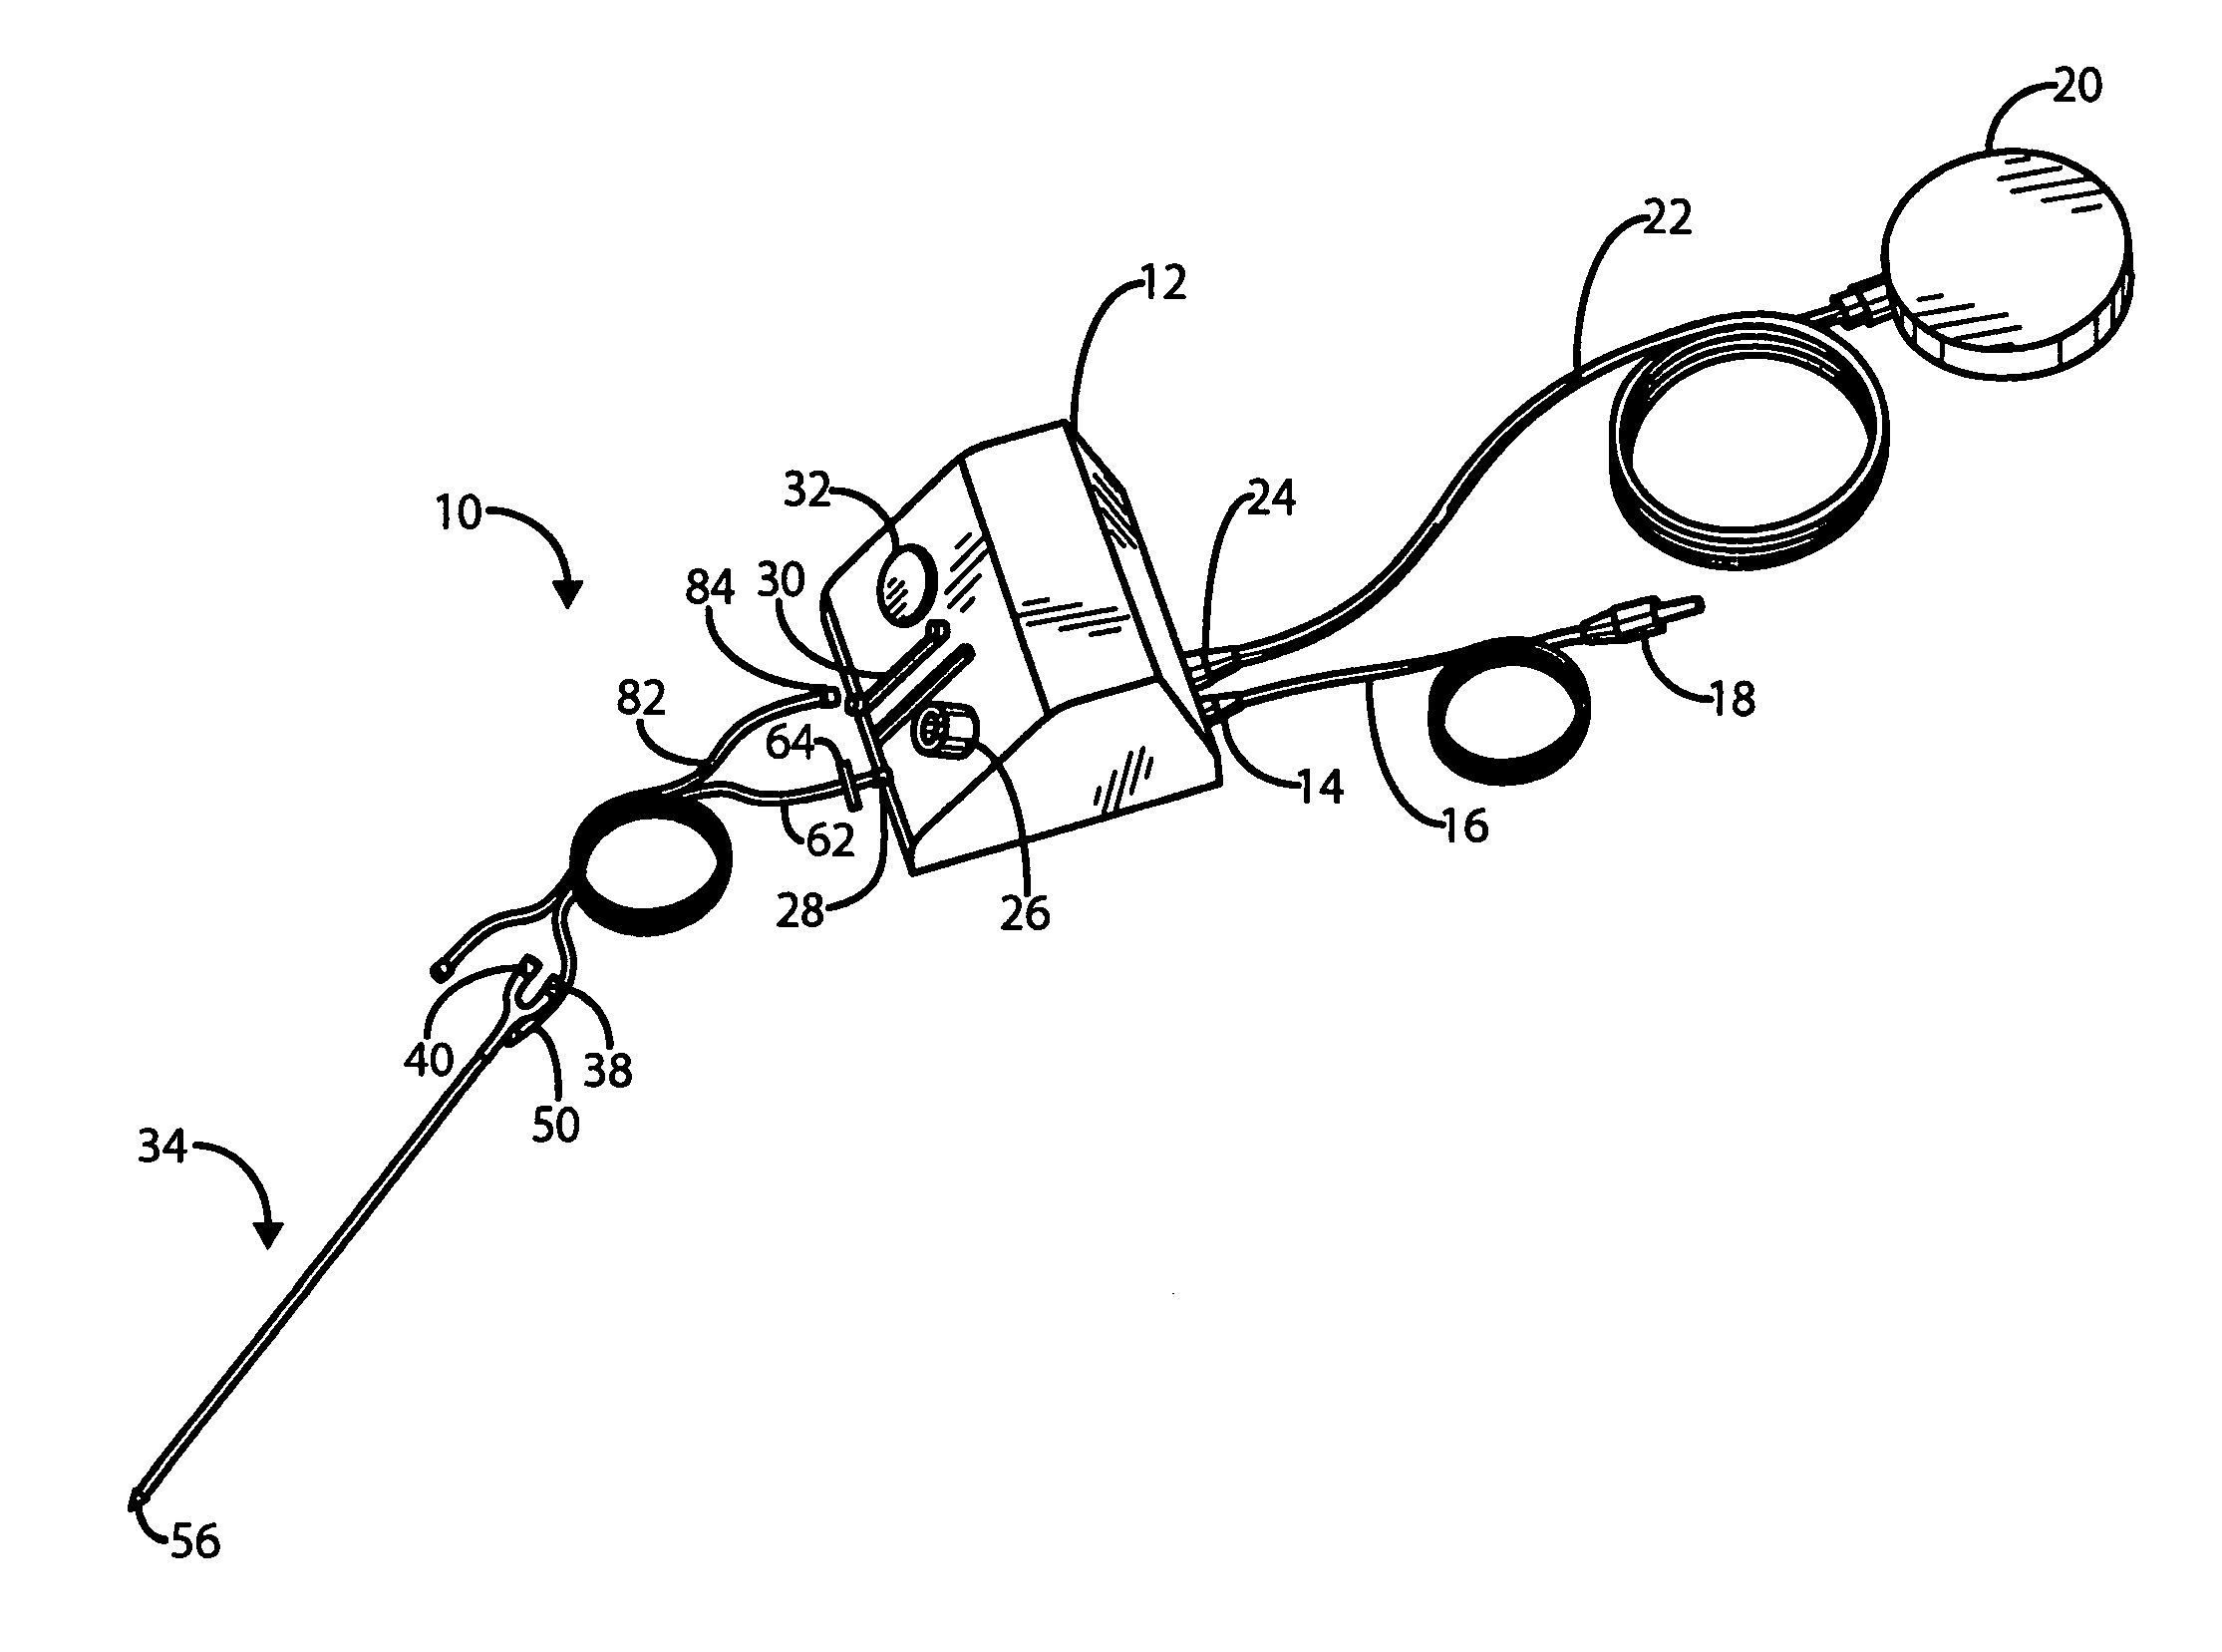 Gas assisted endoscopic applicator system